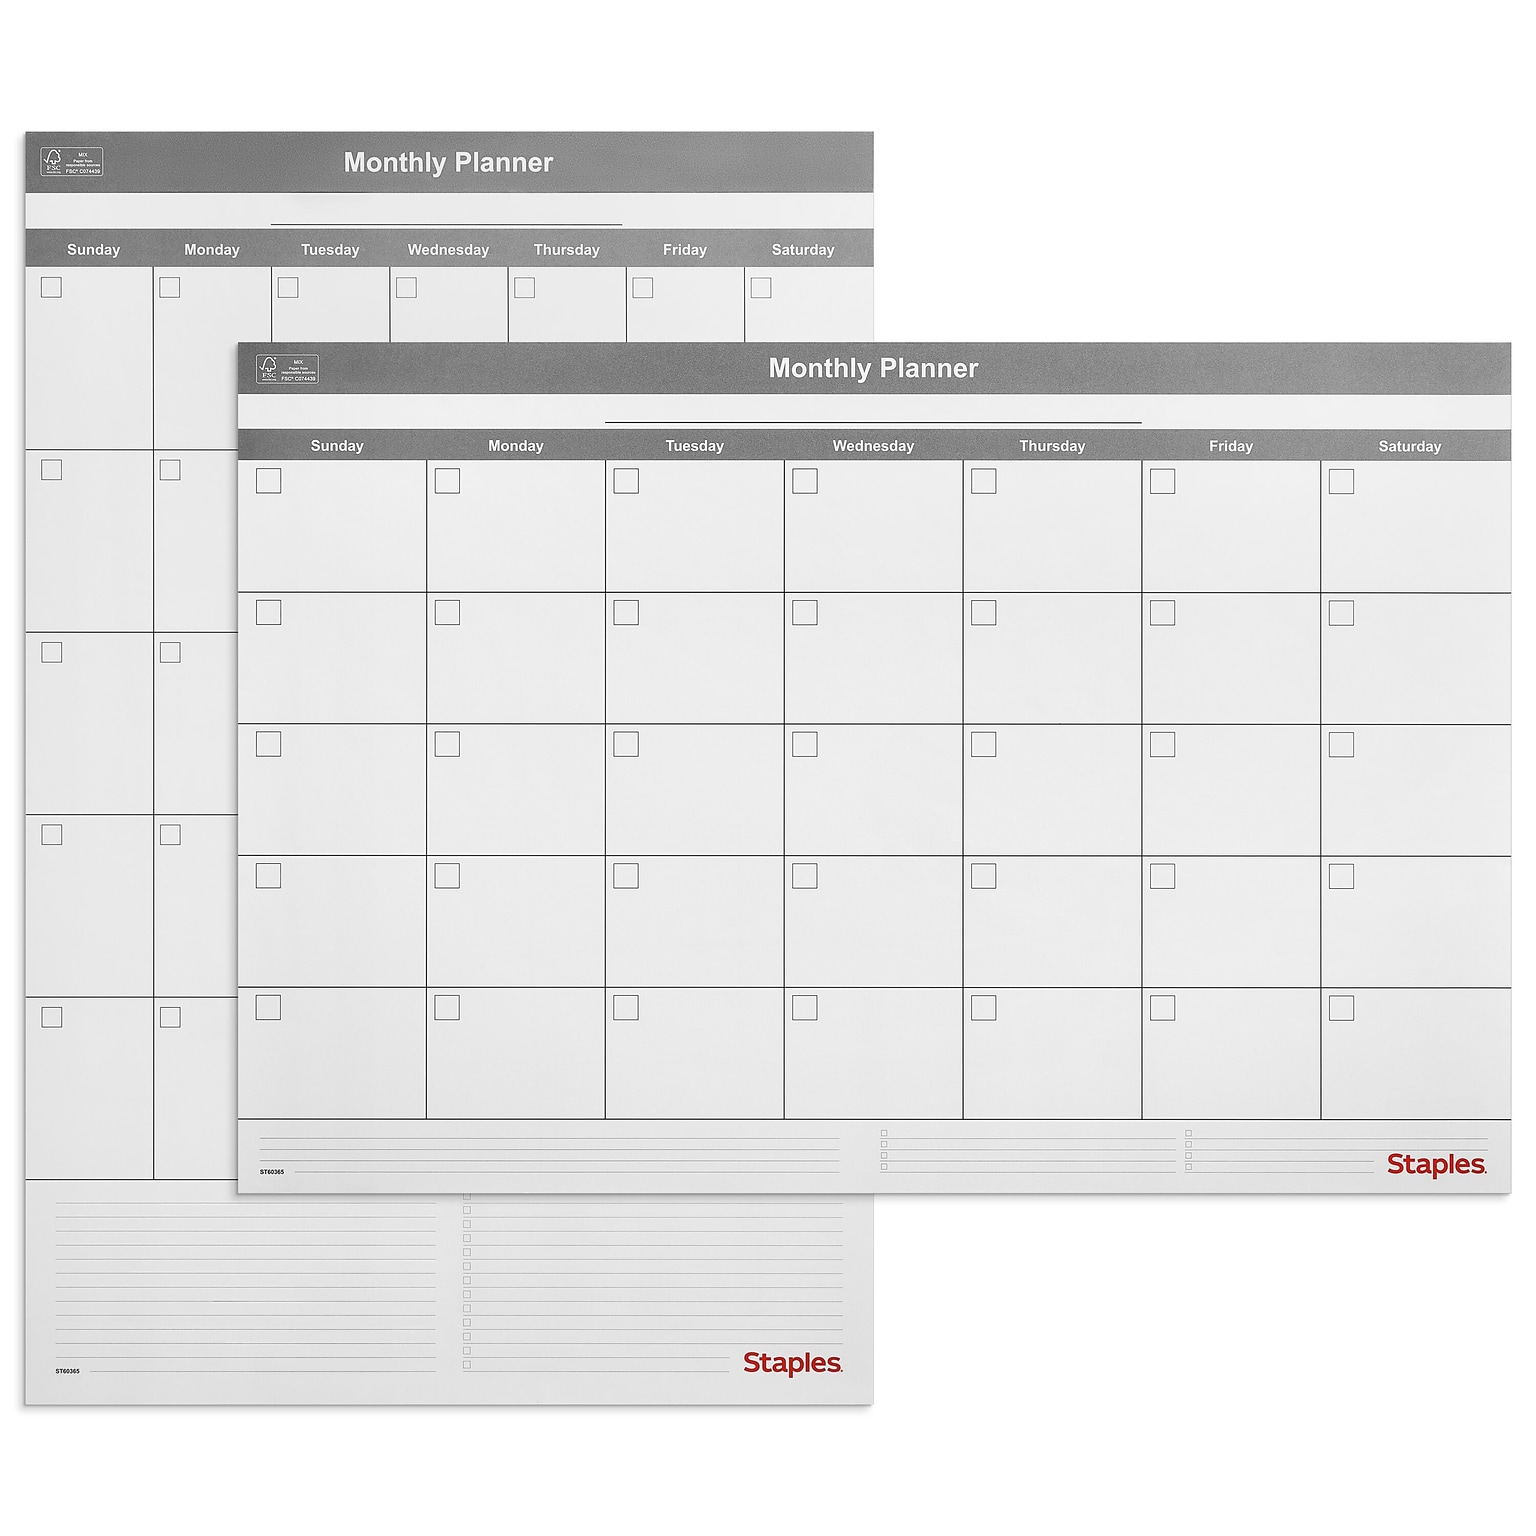 Staples 24 x 36 Monthly Dry-Erase Wall Calendar, Undated, Reversible, White/Gray (ST60365-24)